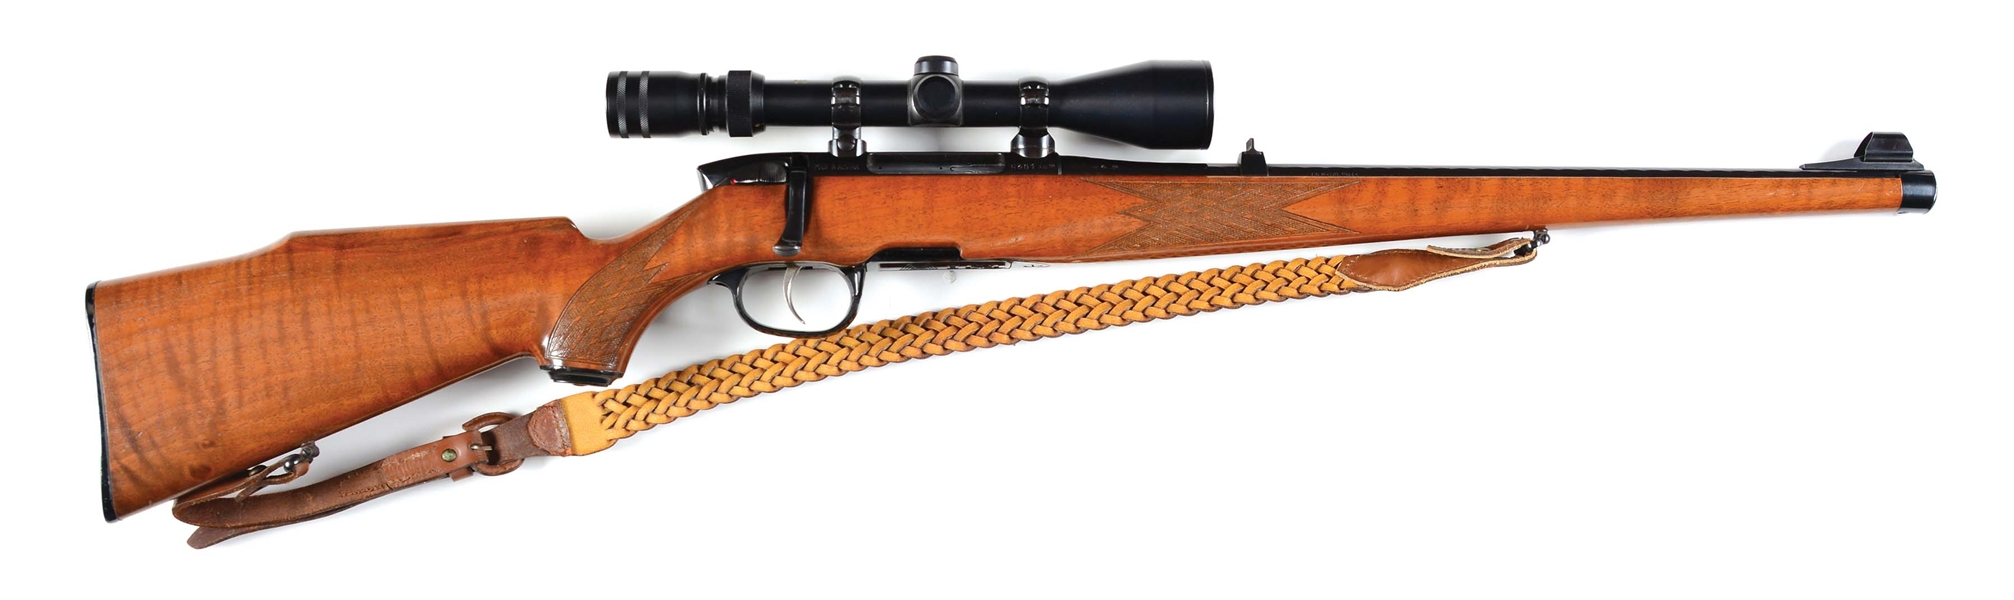 (M) STEYR L .243 BOLT ACTION RIFLE WITH SCOPE.